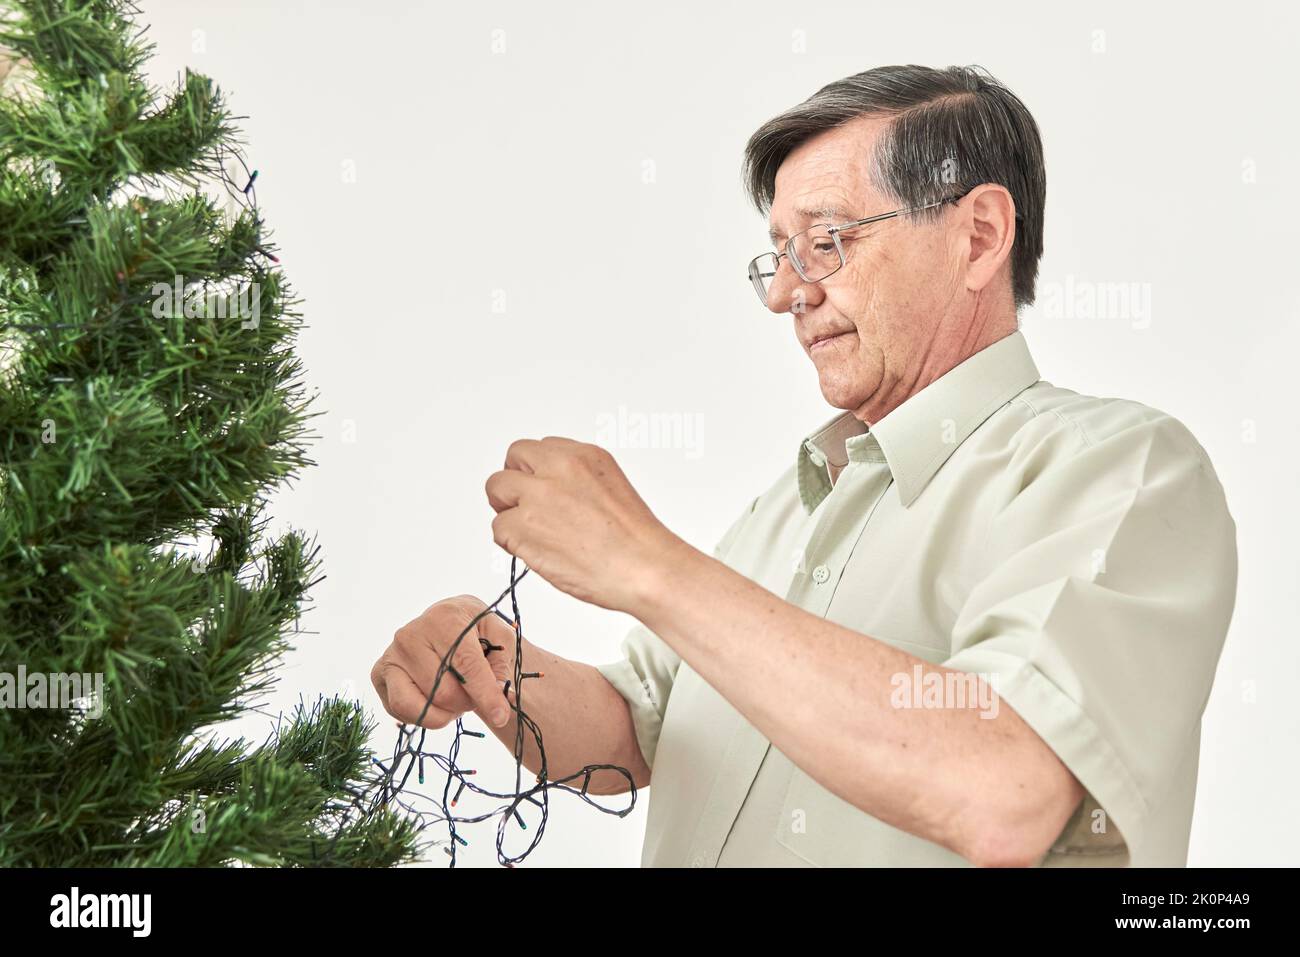 Hispanic senior man concentrated while decorating a Christmas tree, putting a string of led lights on it. Stock Photo